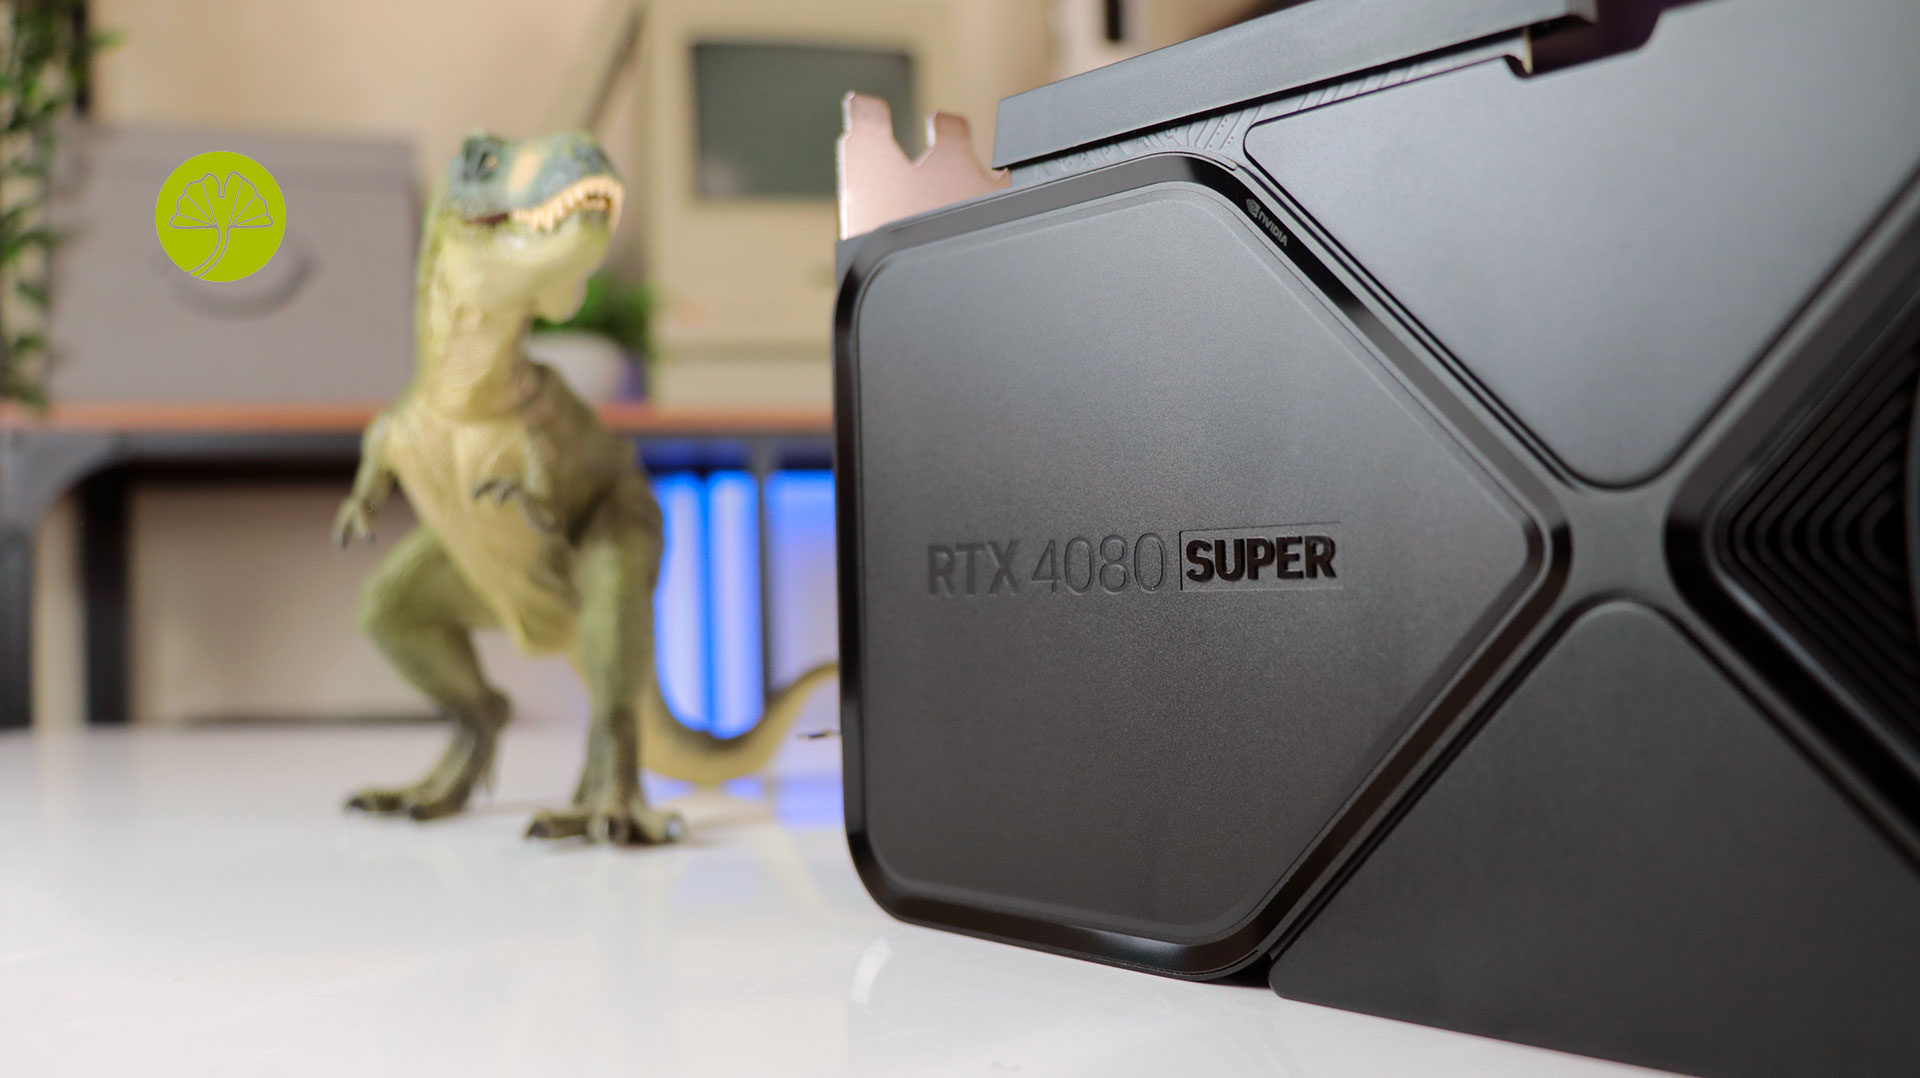 GeForce RTX 4080 SUPER Founders Edition